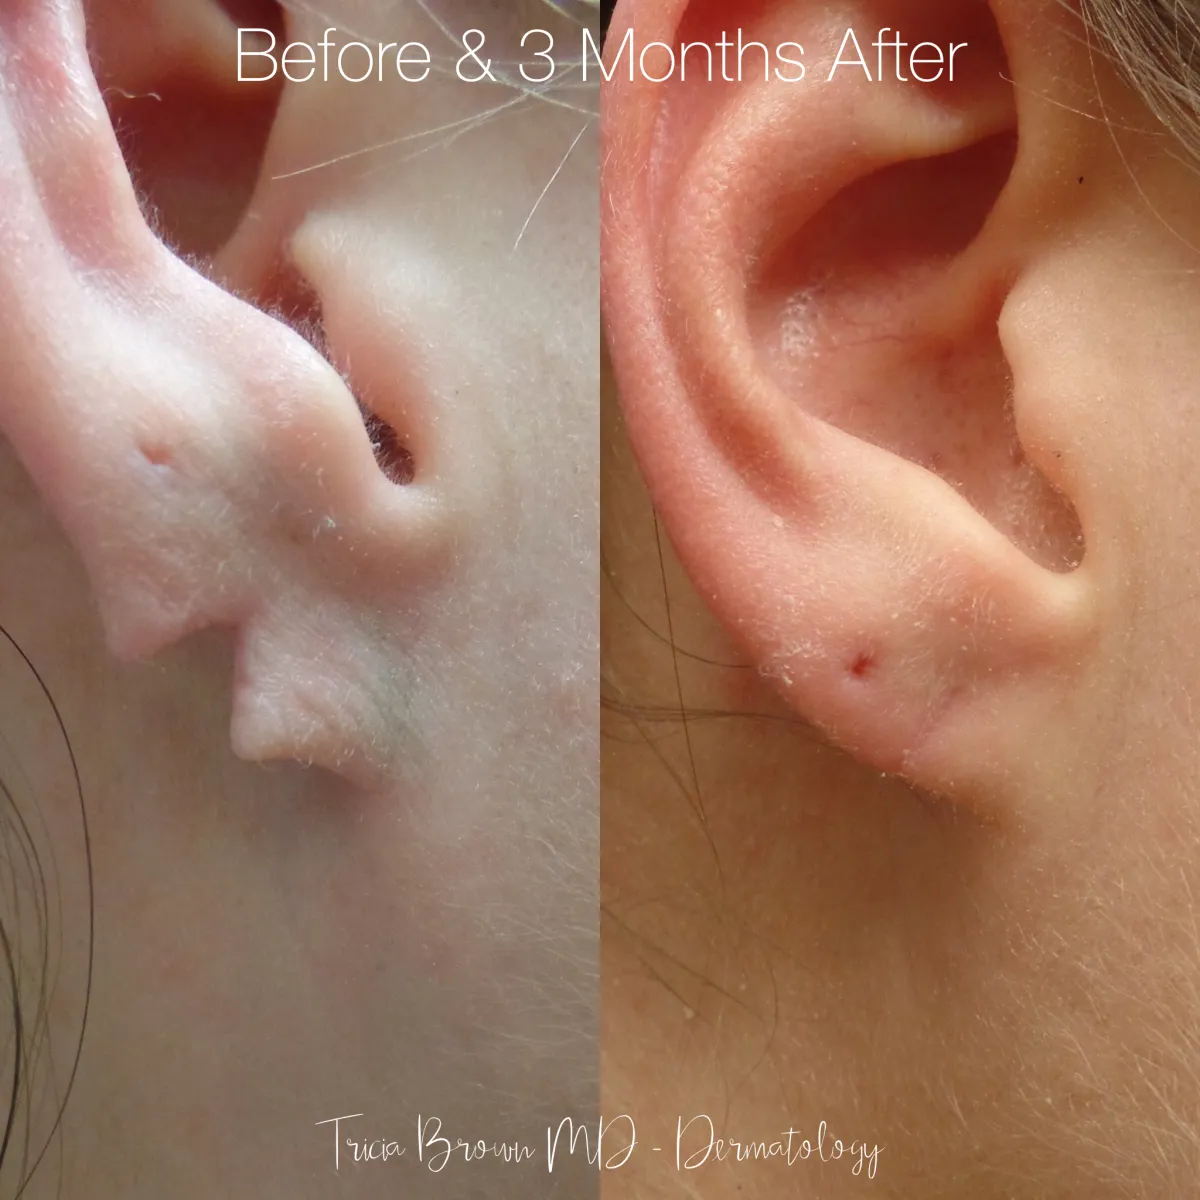 The Leading Experts in Earlobe Repair Advanced Liposuction Center.